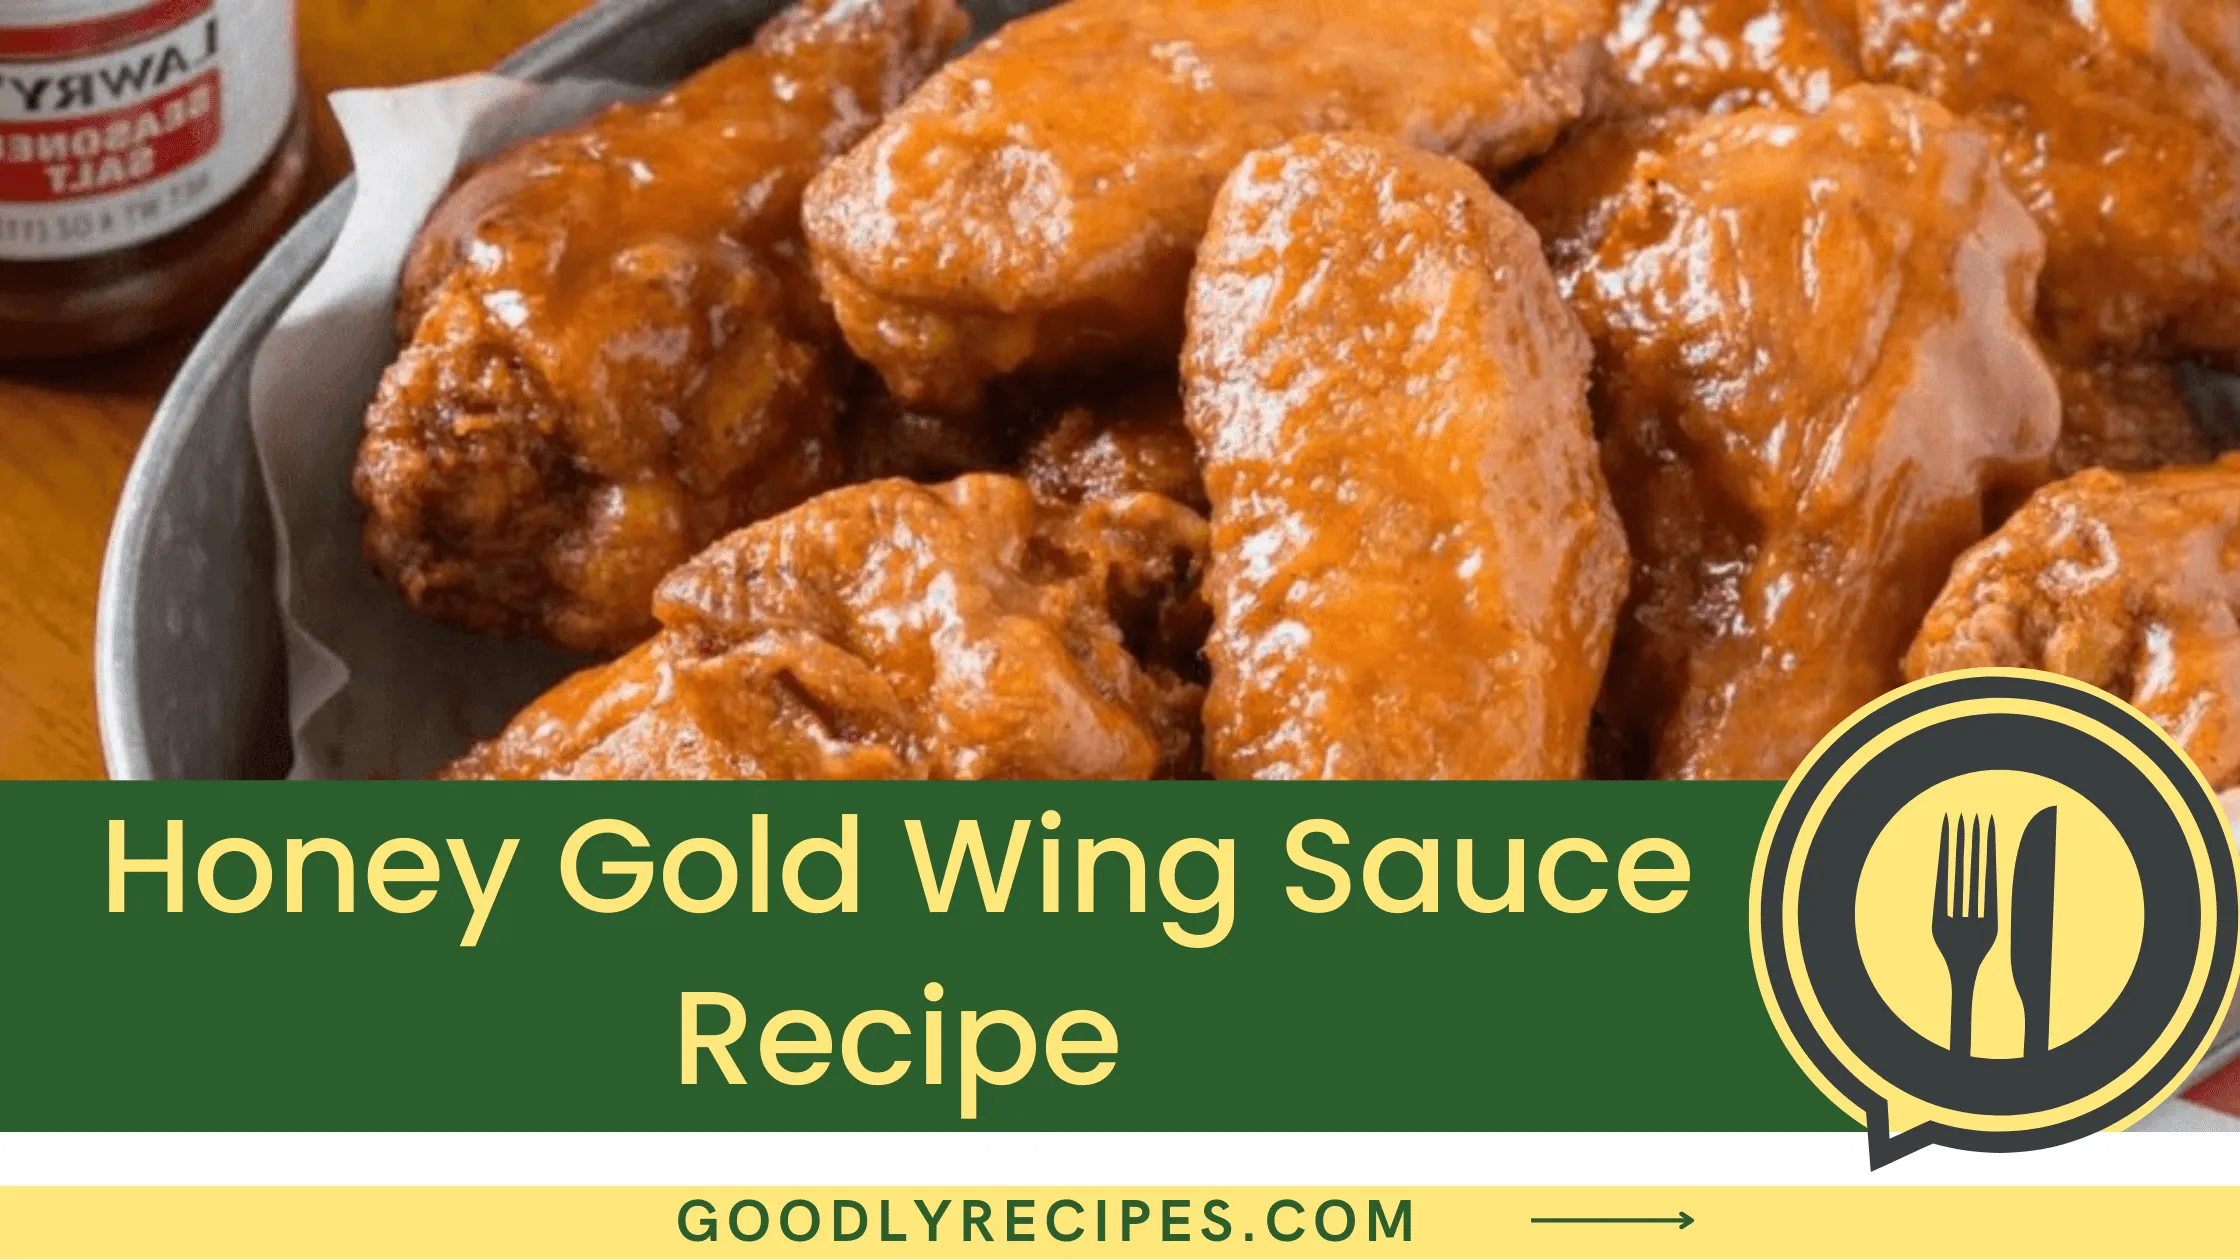 What Is Honey Gold Wing Sauce Rice?